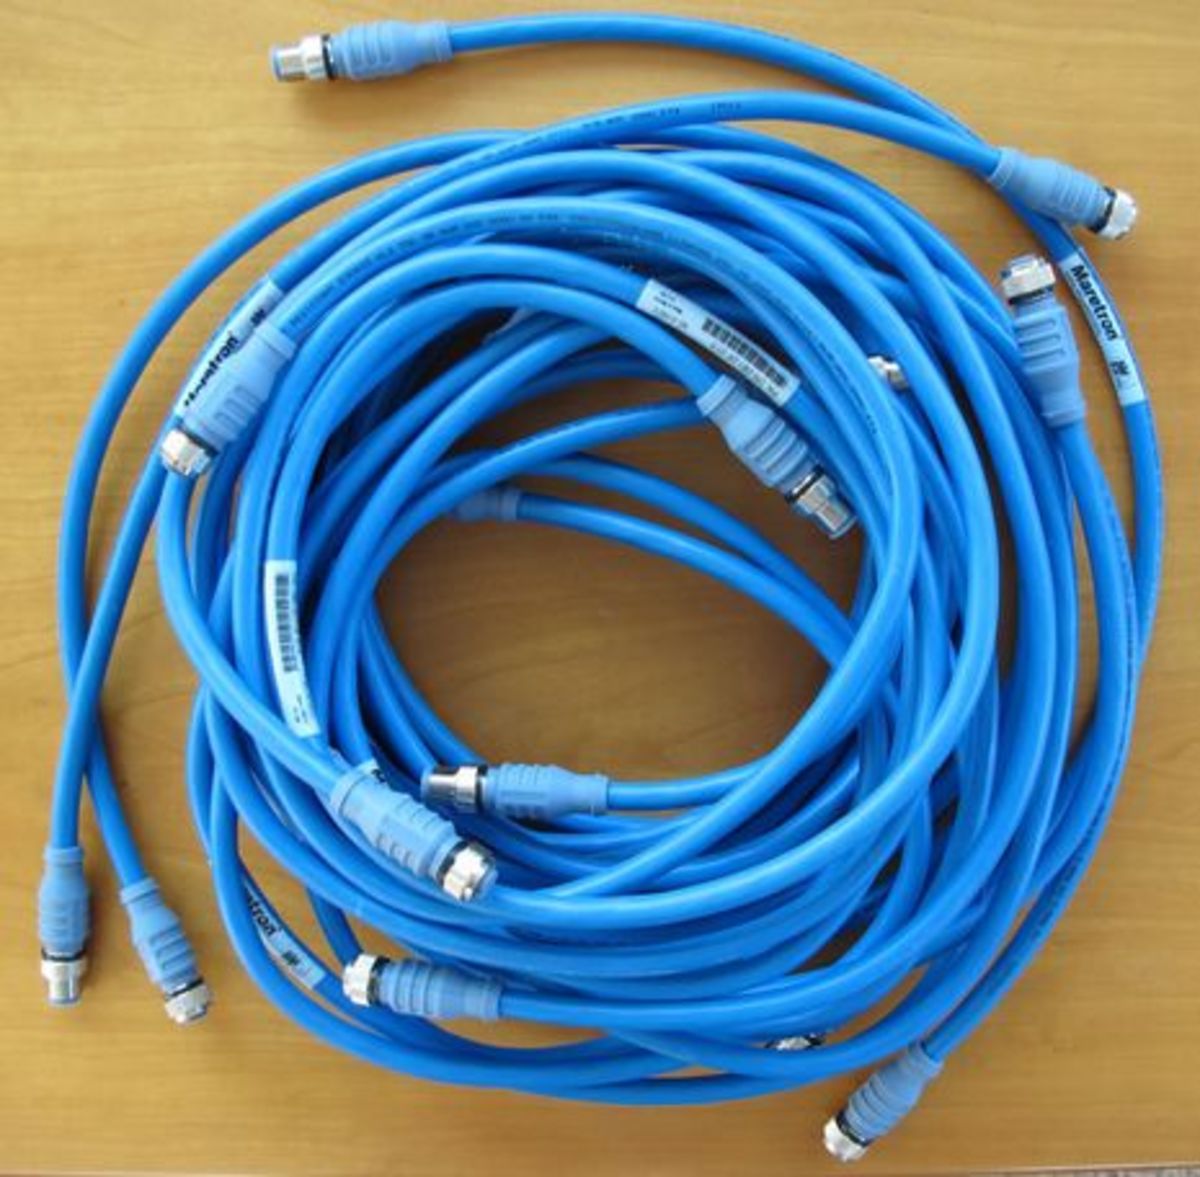 Gizmo_3-2013_Maretron_MID_N2K_cables_cPanbo.jpg